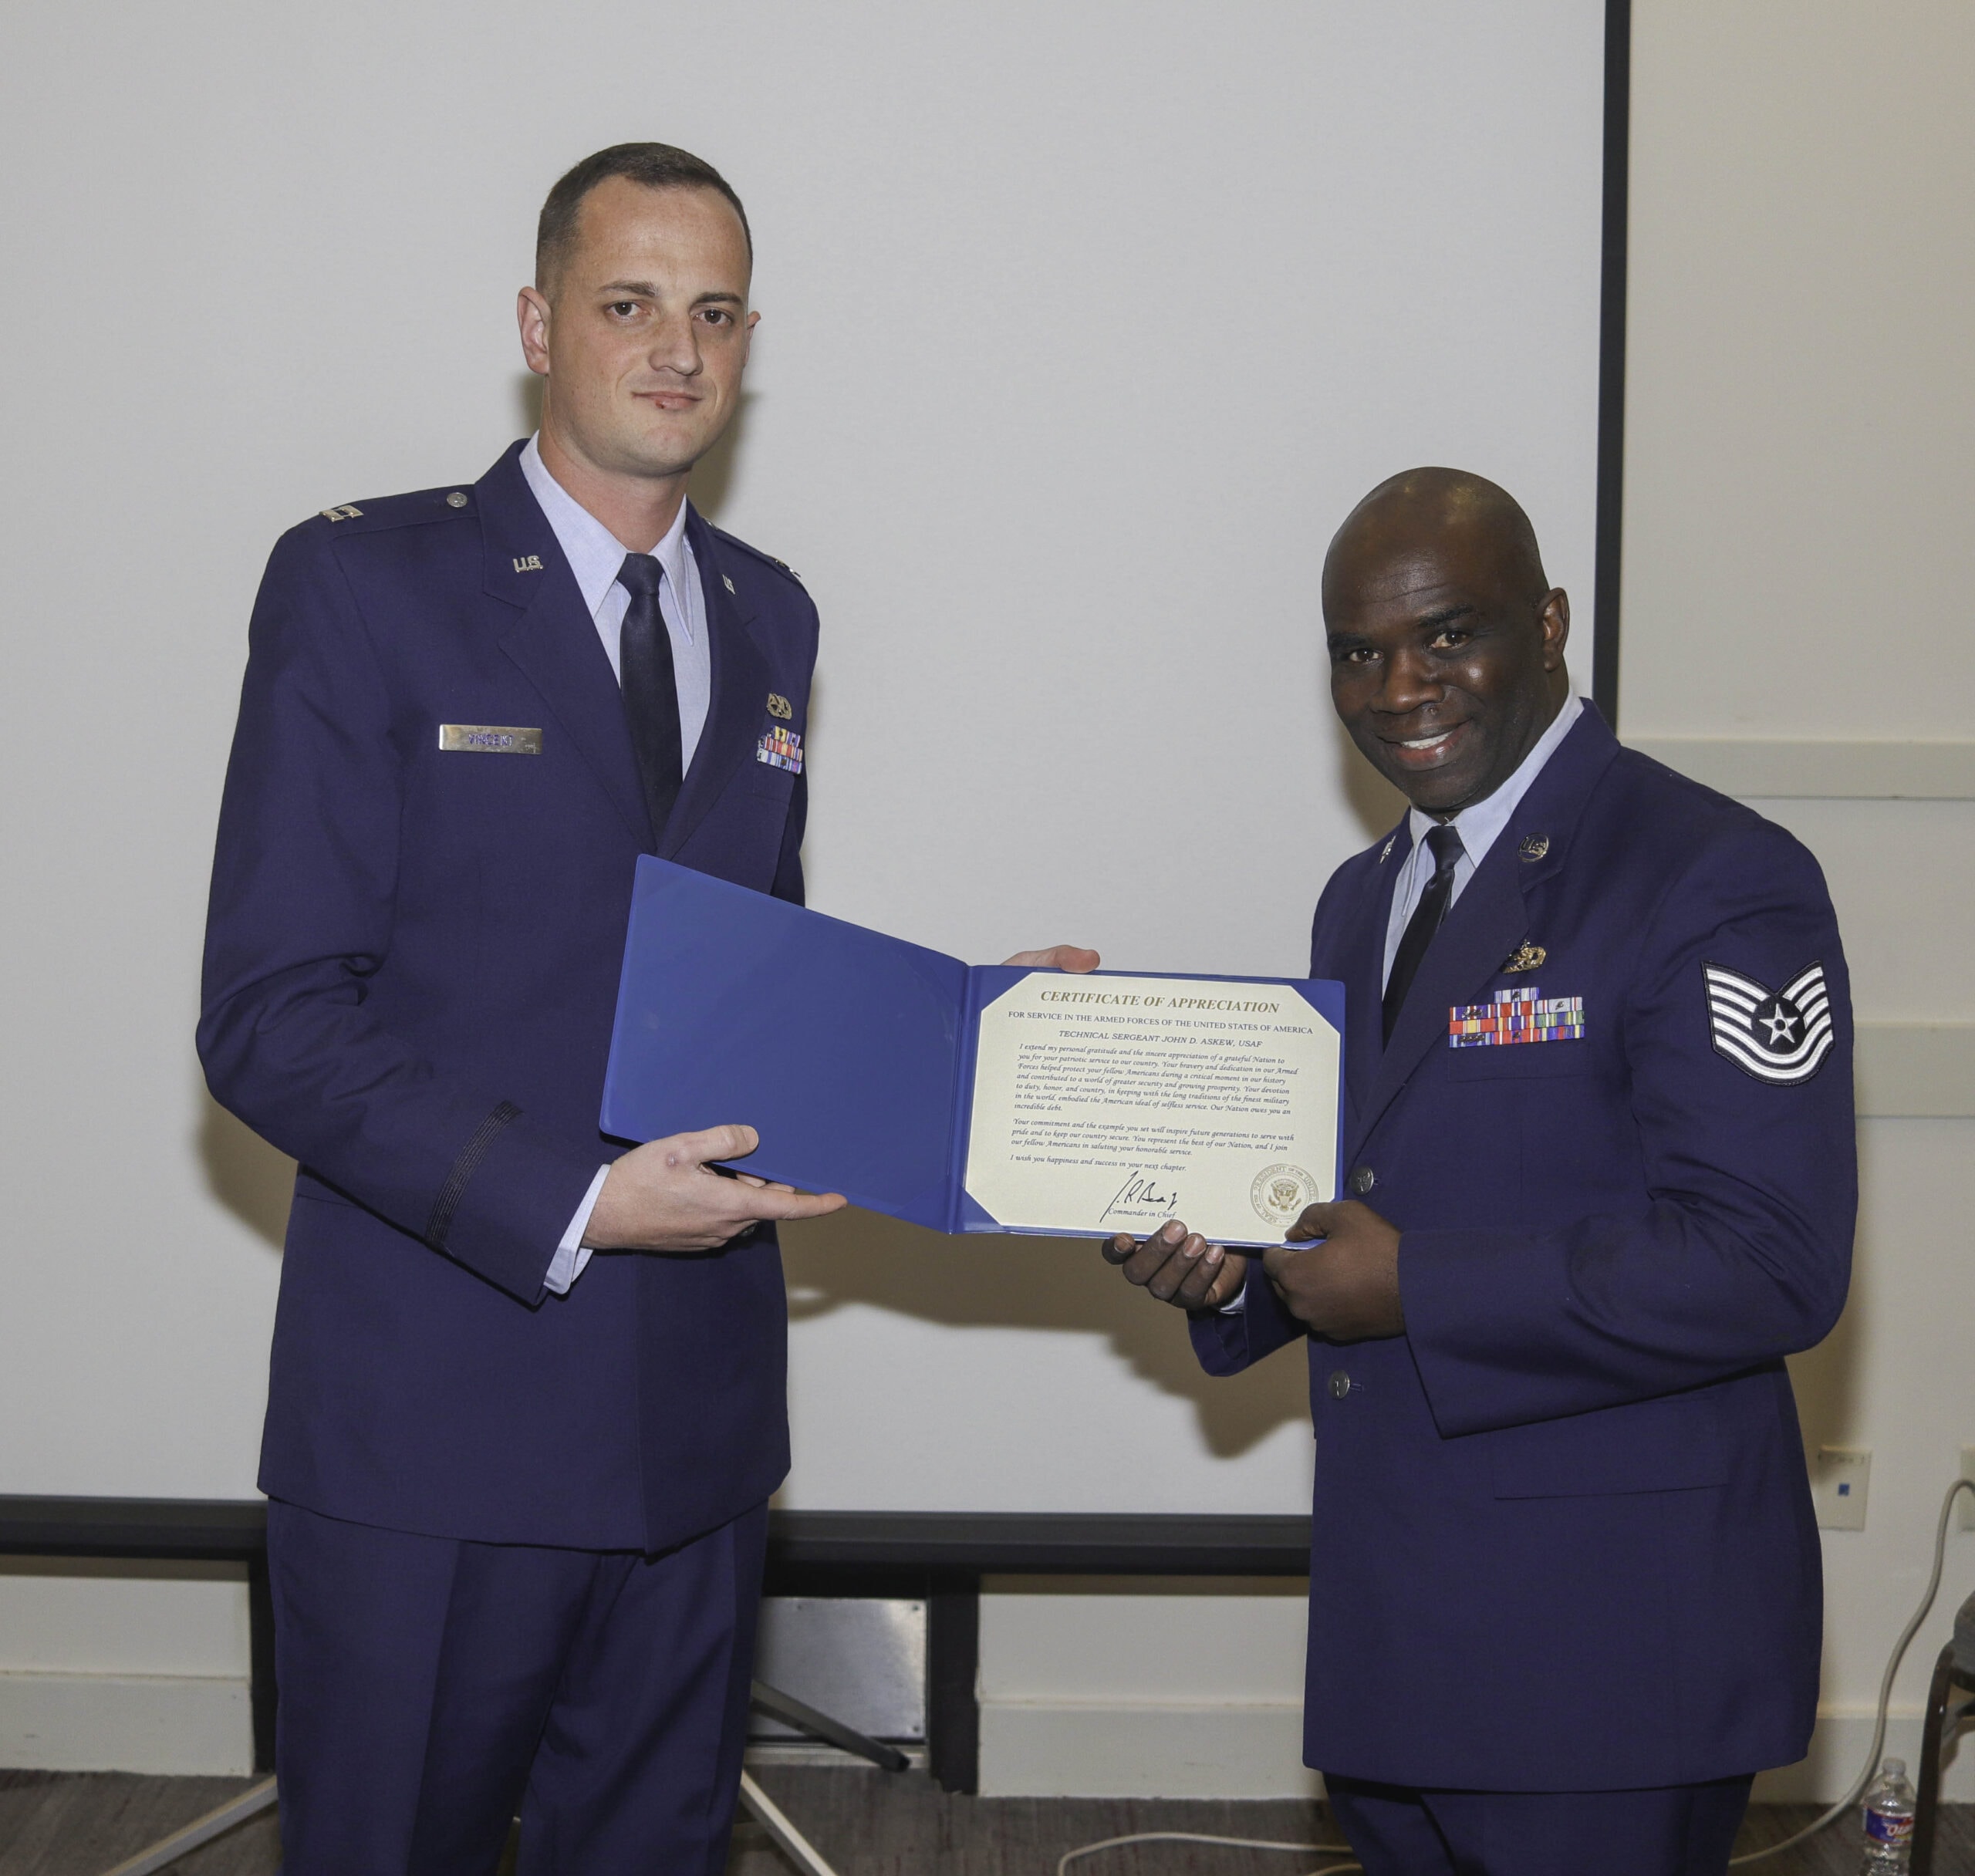 TSgt Askew honored at retirement